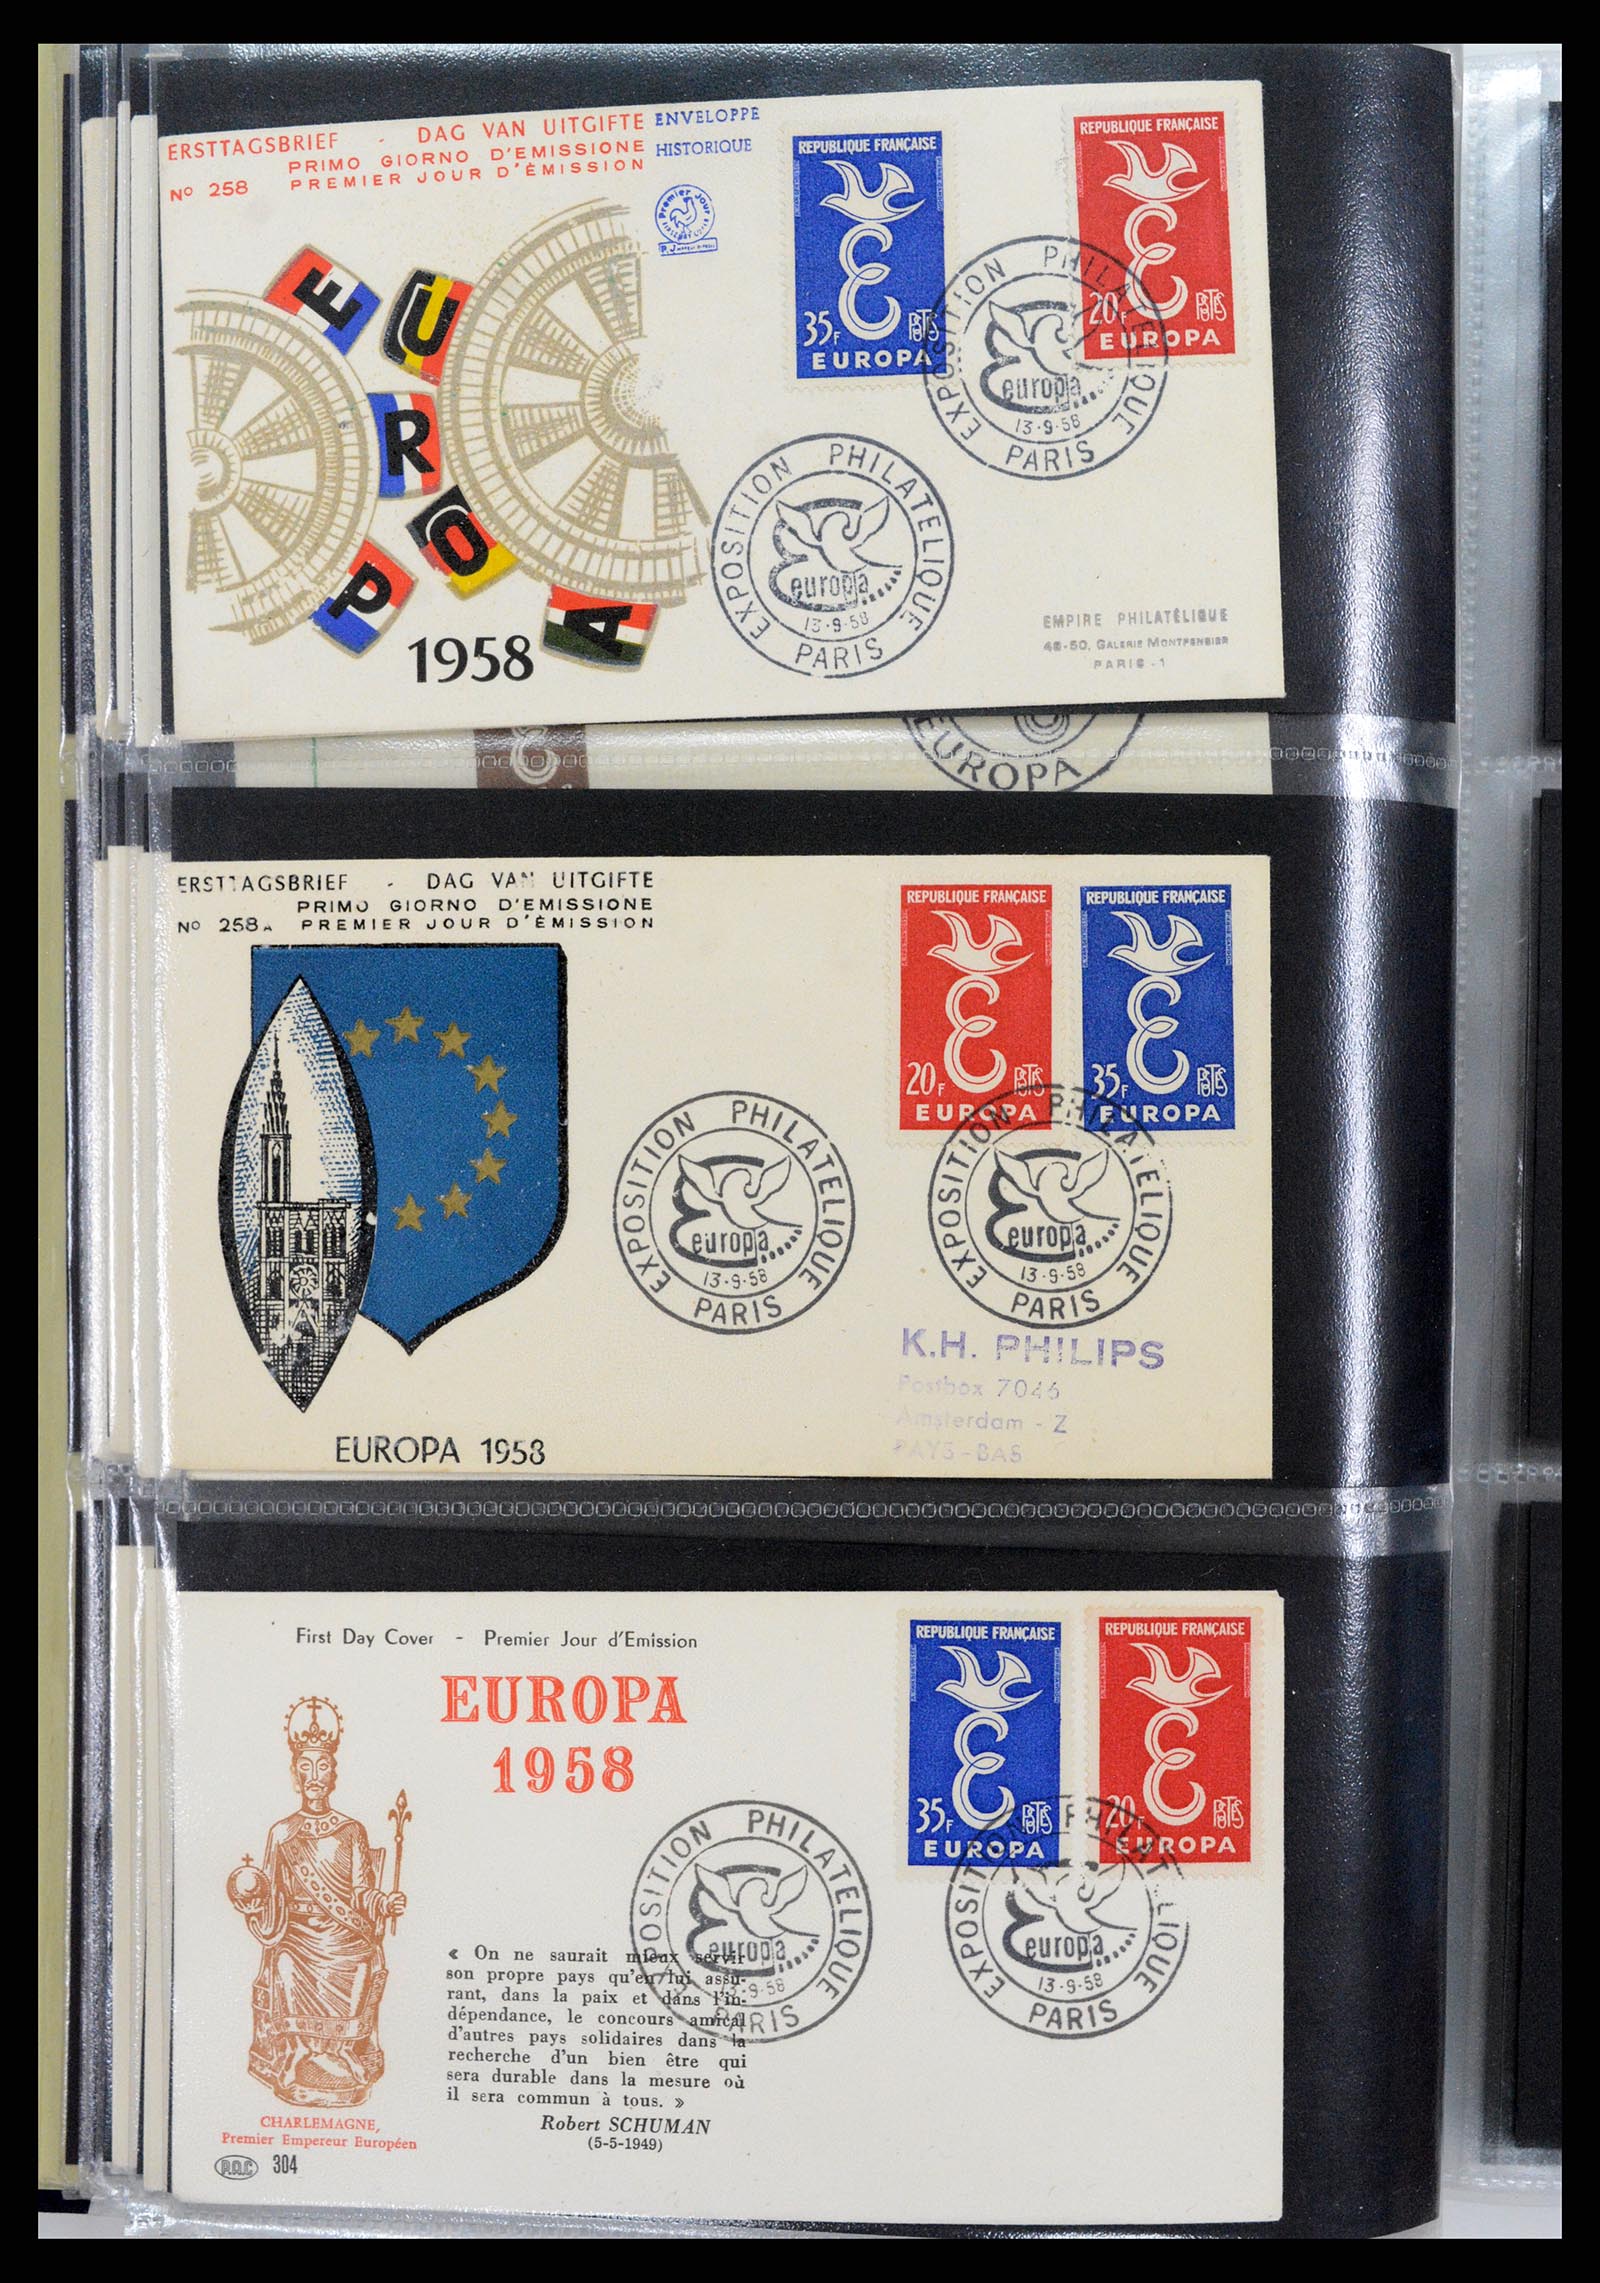 37694 017 - Stamp collection 37694 Europa CEPT FDC's 1956-1970.